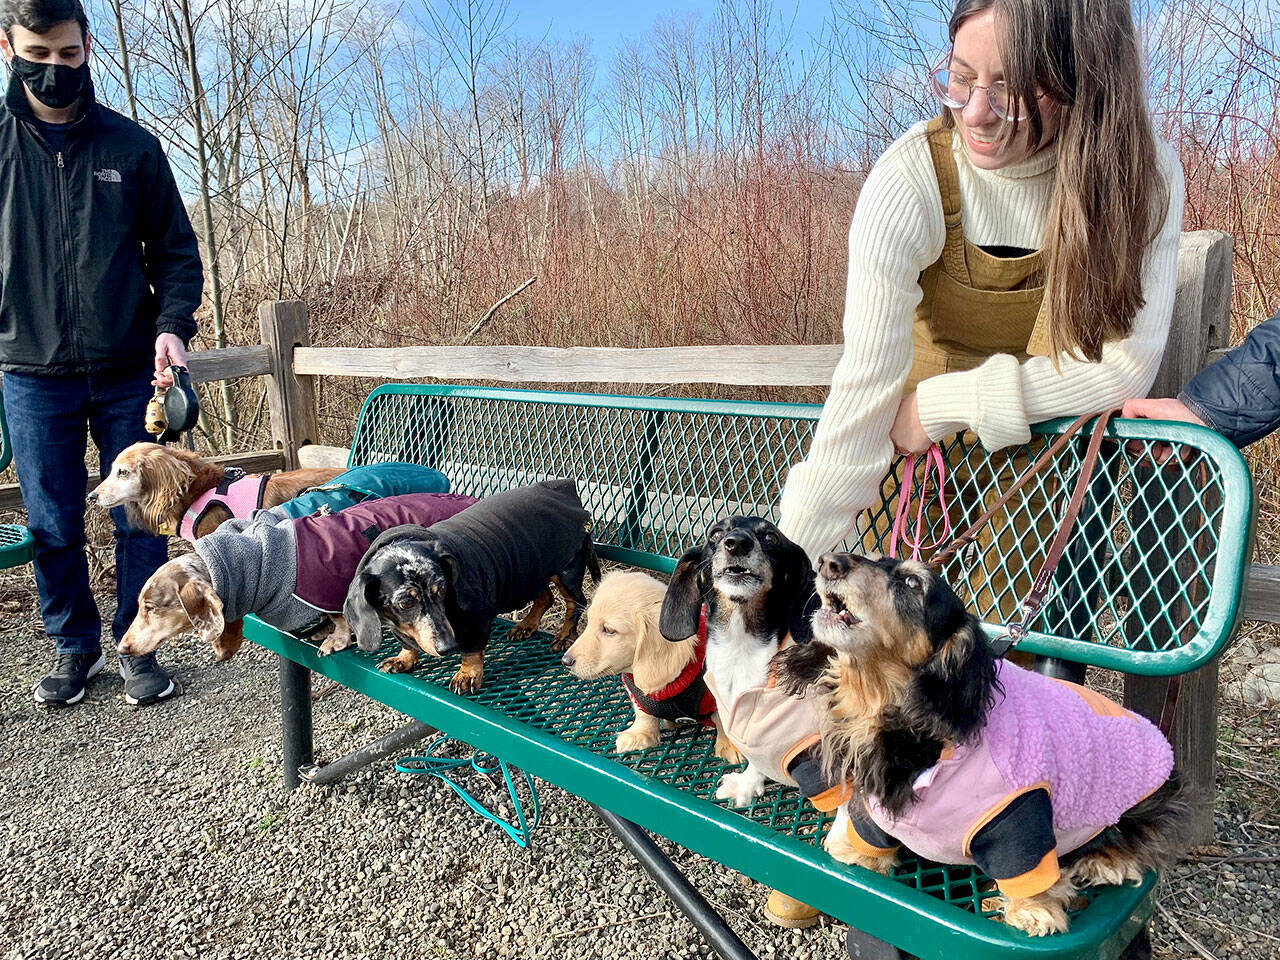 The group of dachshunds taking part in the Adventurewiener Club walk pause for a group photo. (Bob Smith | Kitsap Daily News)